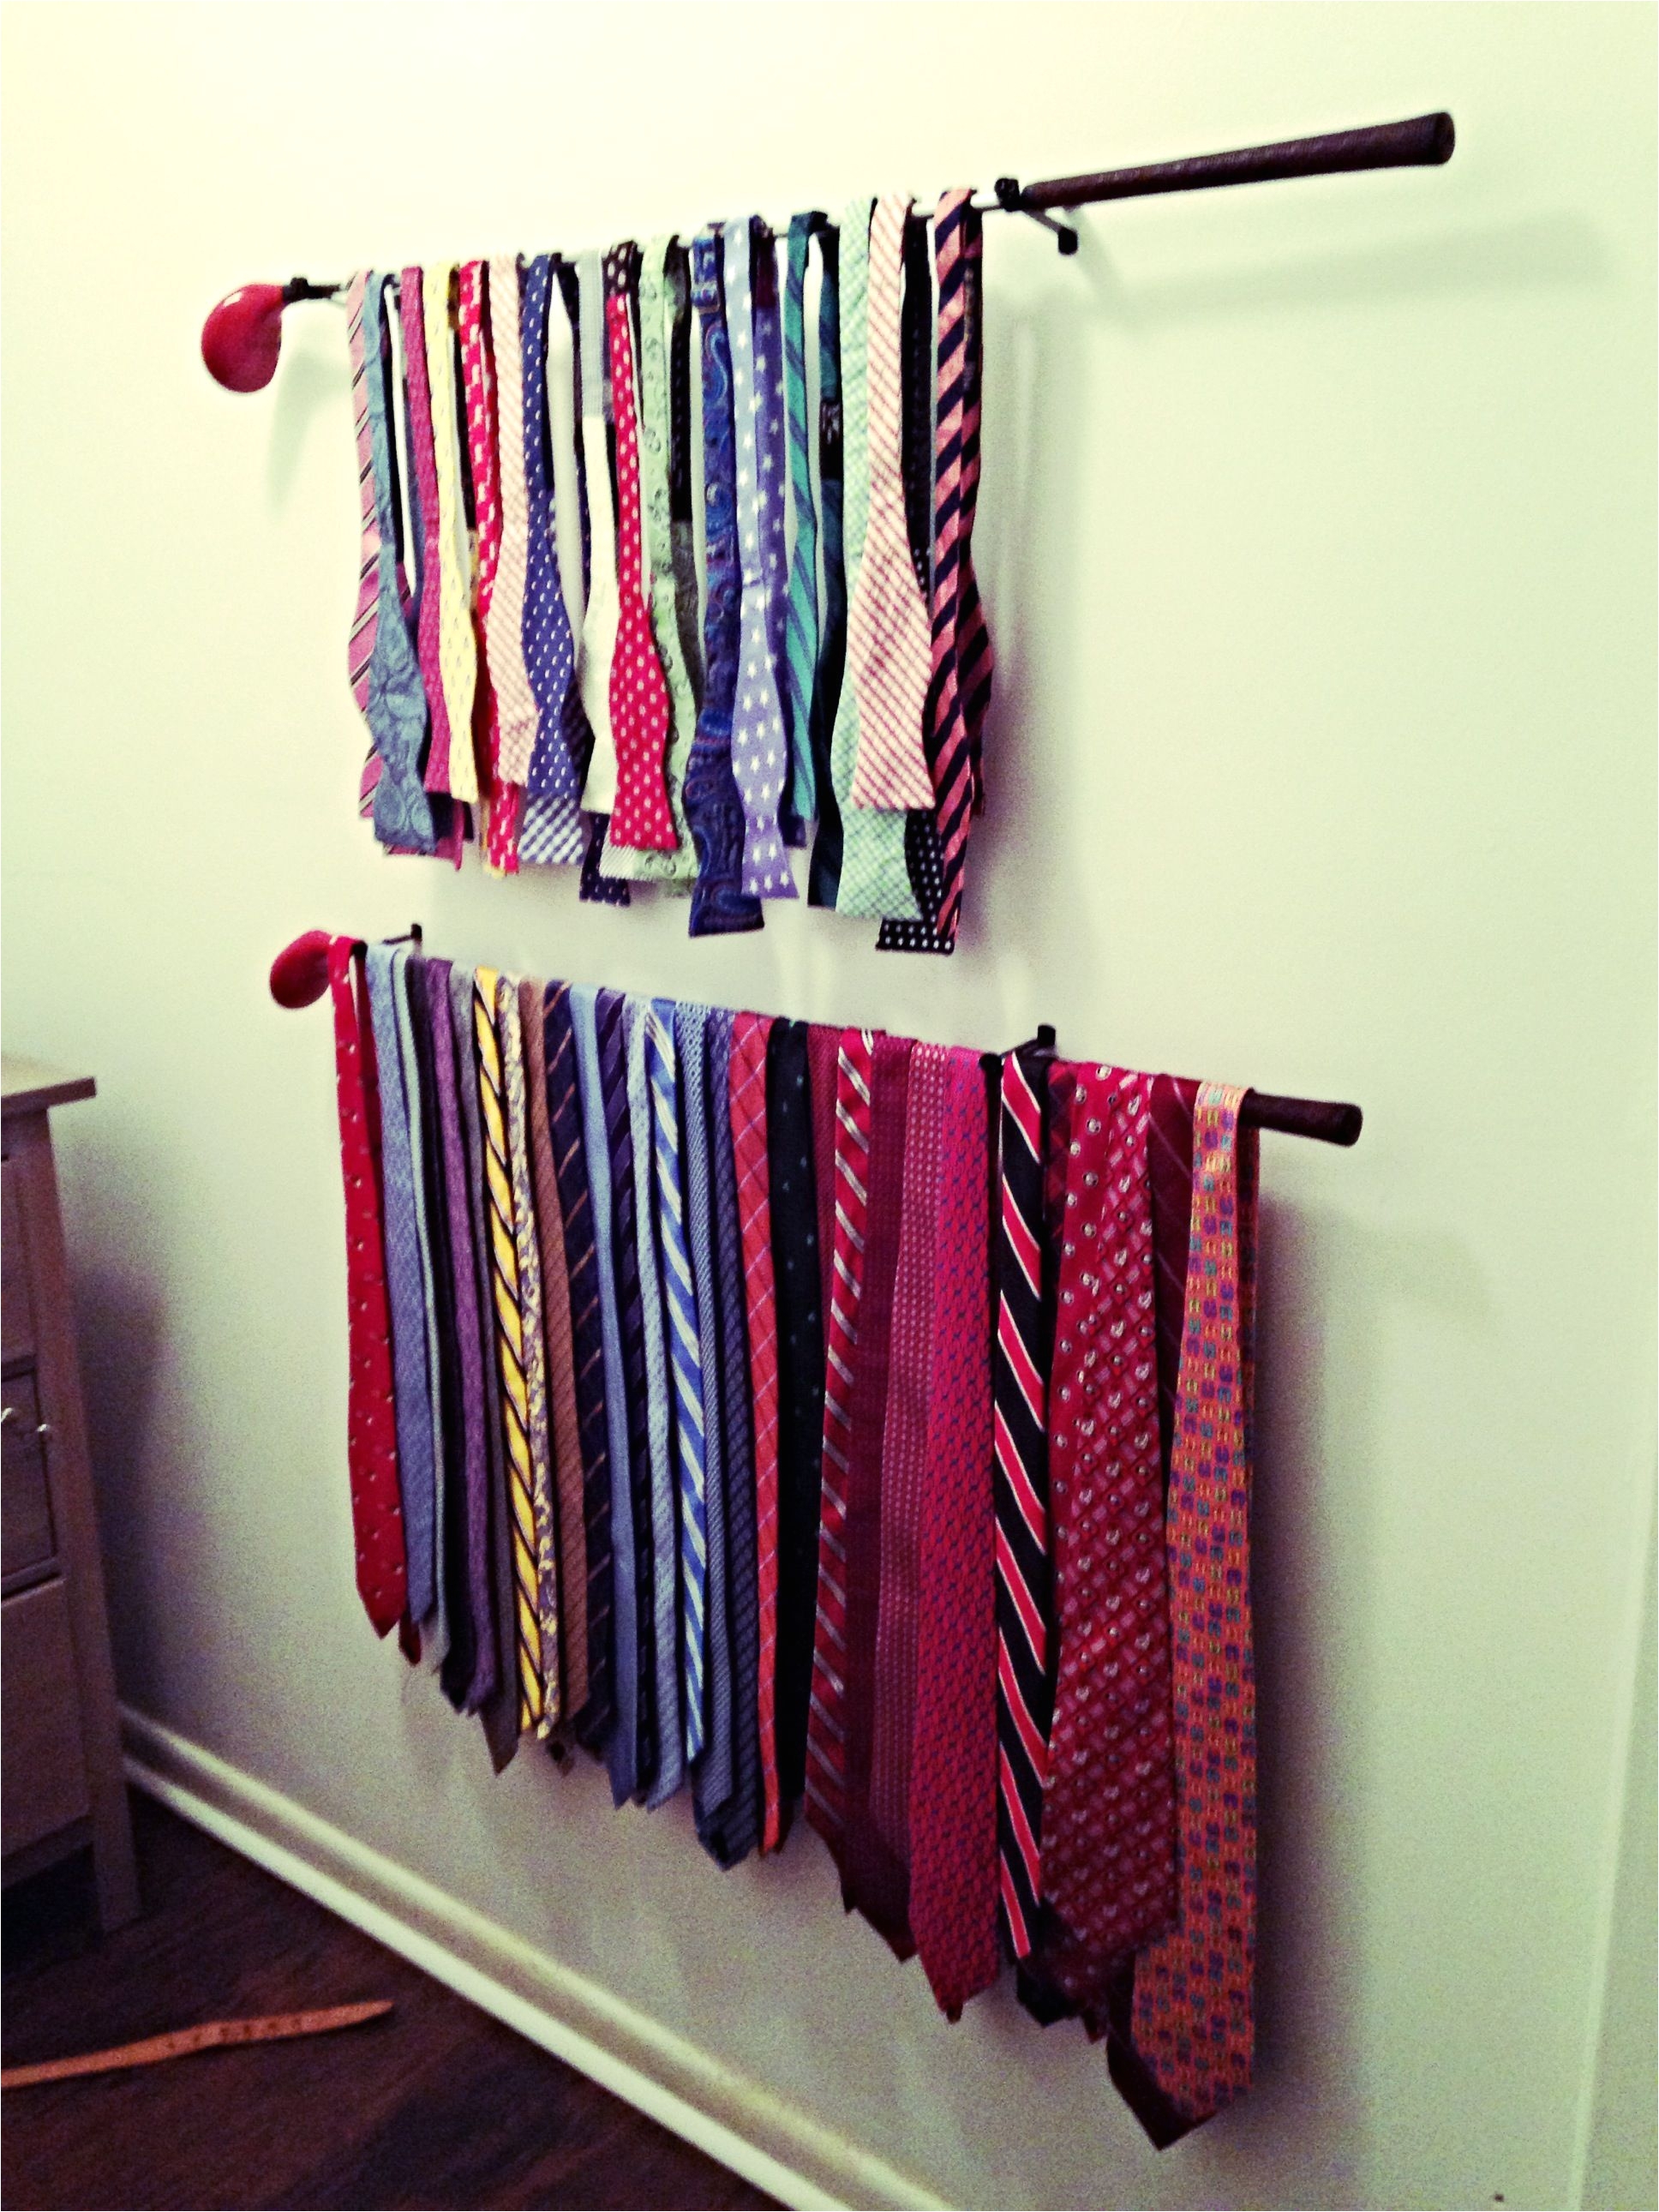 Electric Tie Rack Walmart Jared Turned My Grandfathers Old Wooden Golf Clubs Into His New Tie